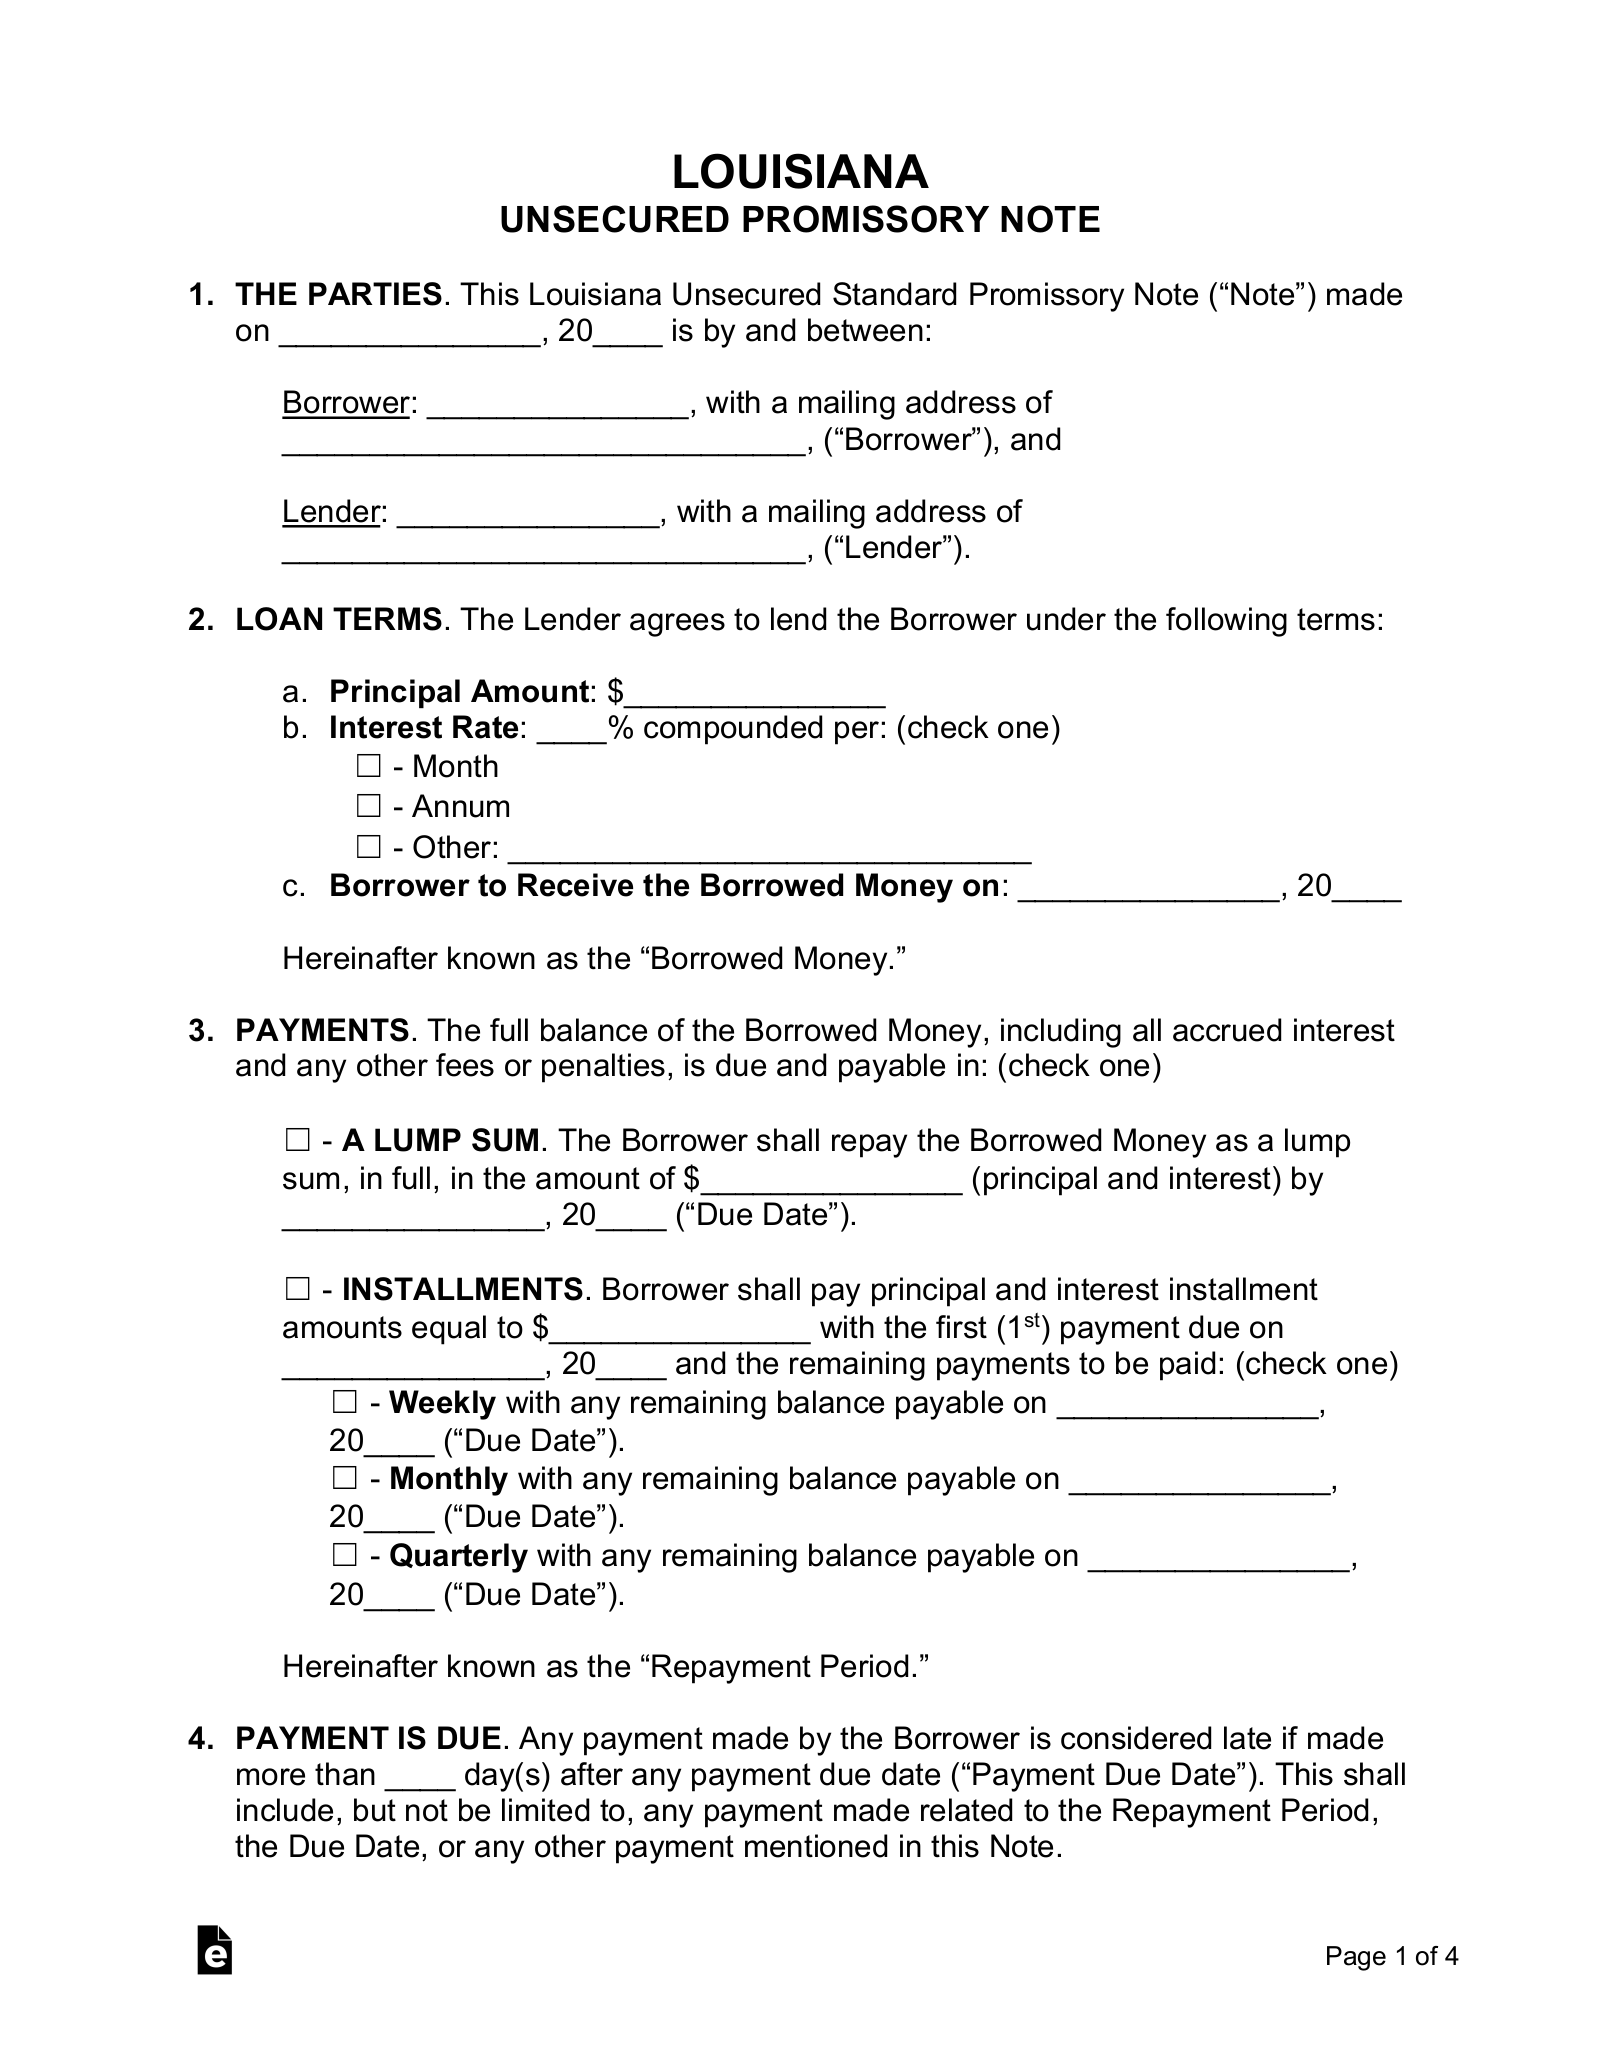 Louisiana Unsecured Promissory Note Template